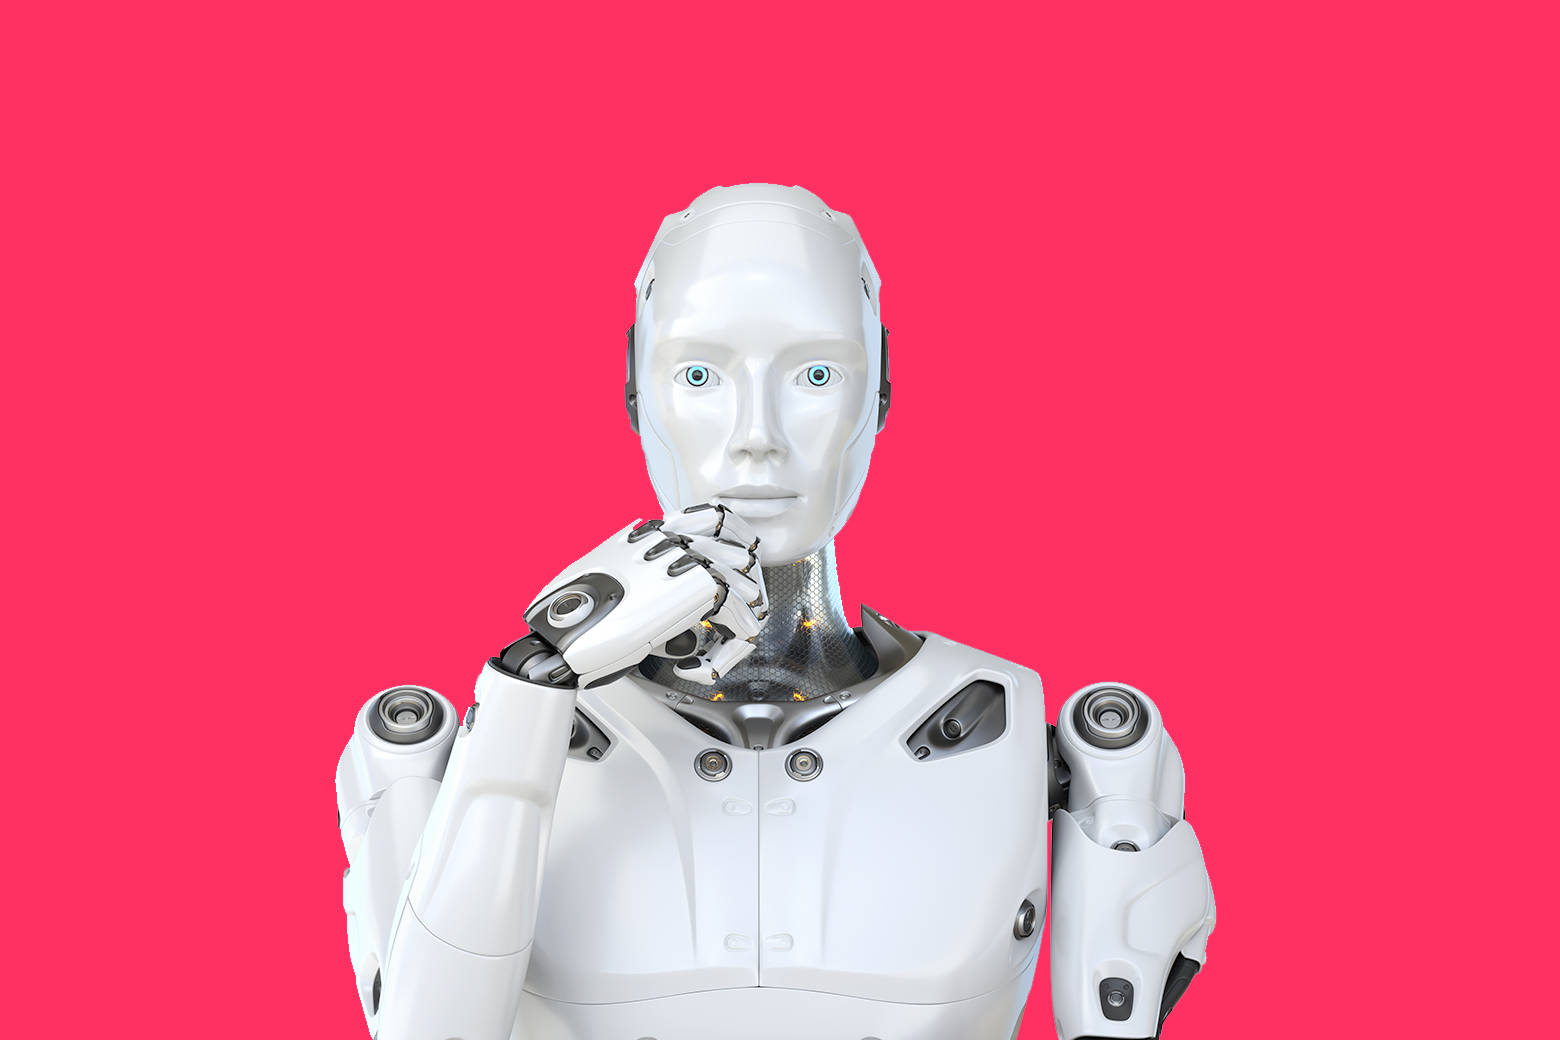 Robot on a pink background.